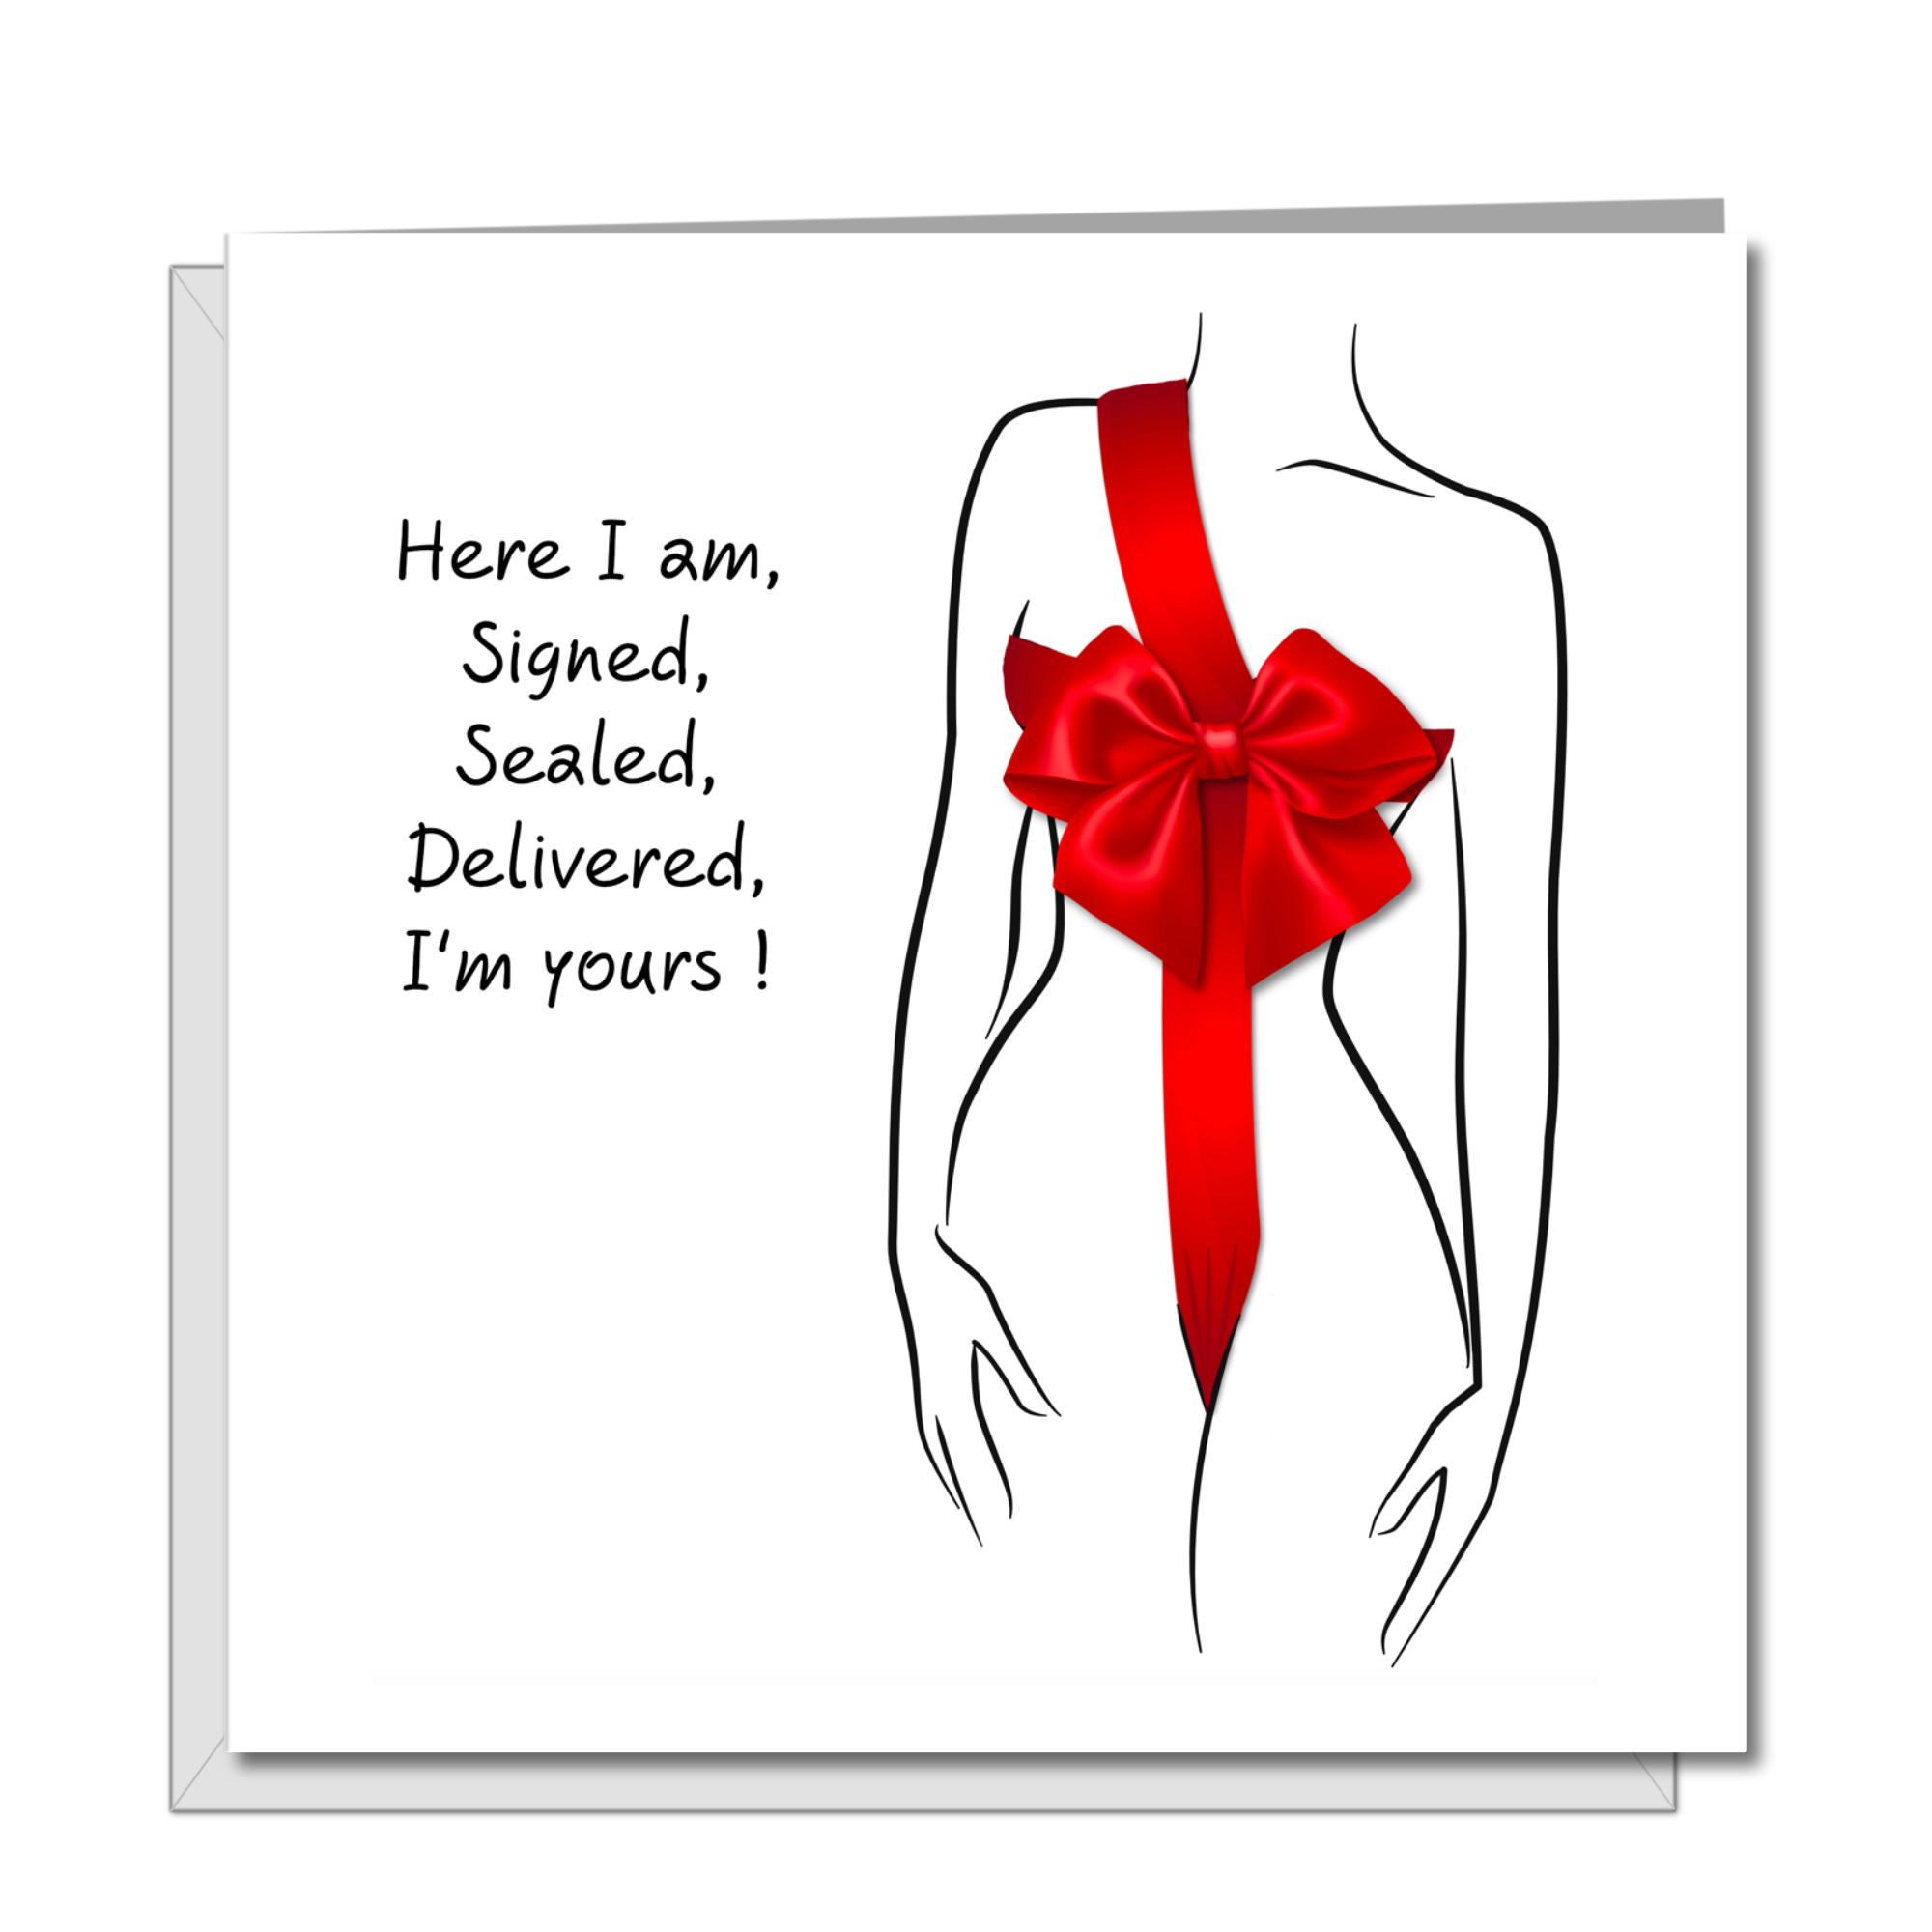 Sexy Birthday or Valentines Card for boyfriend, husband, fiance or lover - Signed sealed delivered - Naughty Rude Naked Bondage